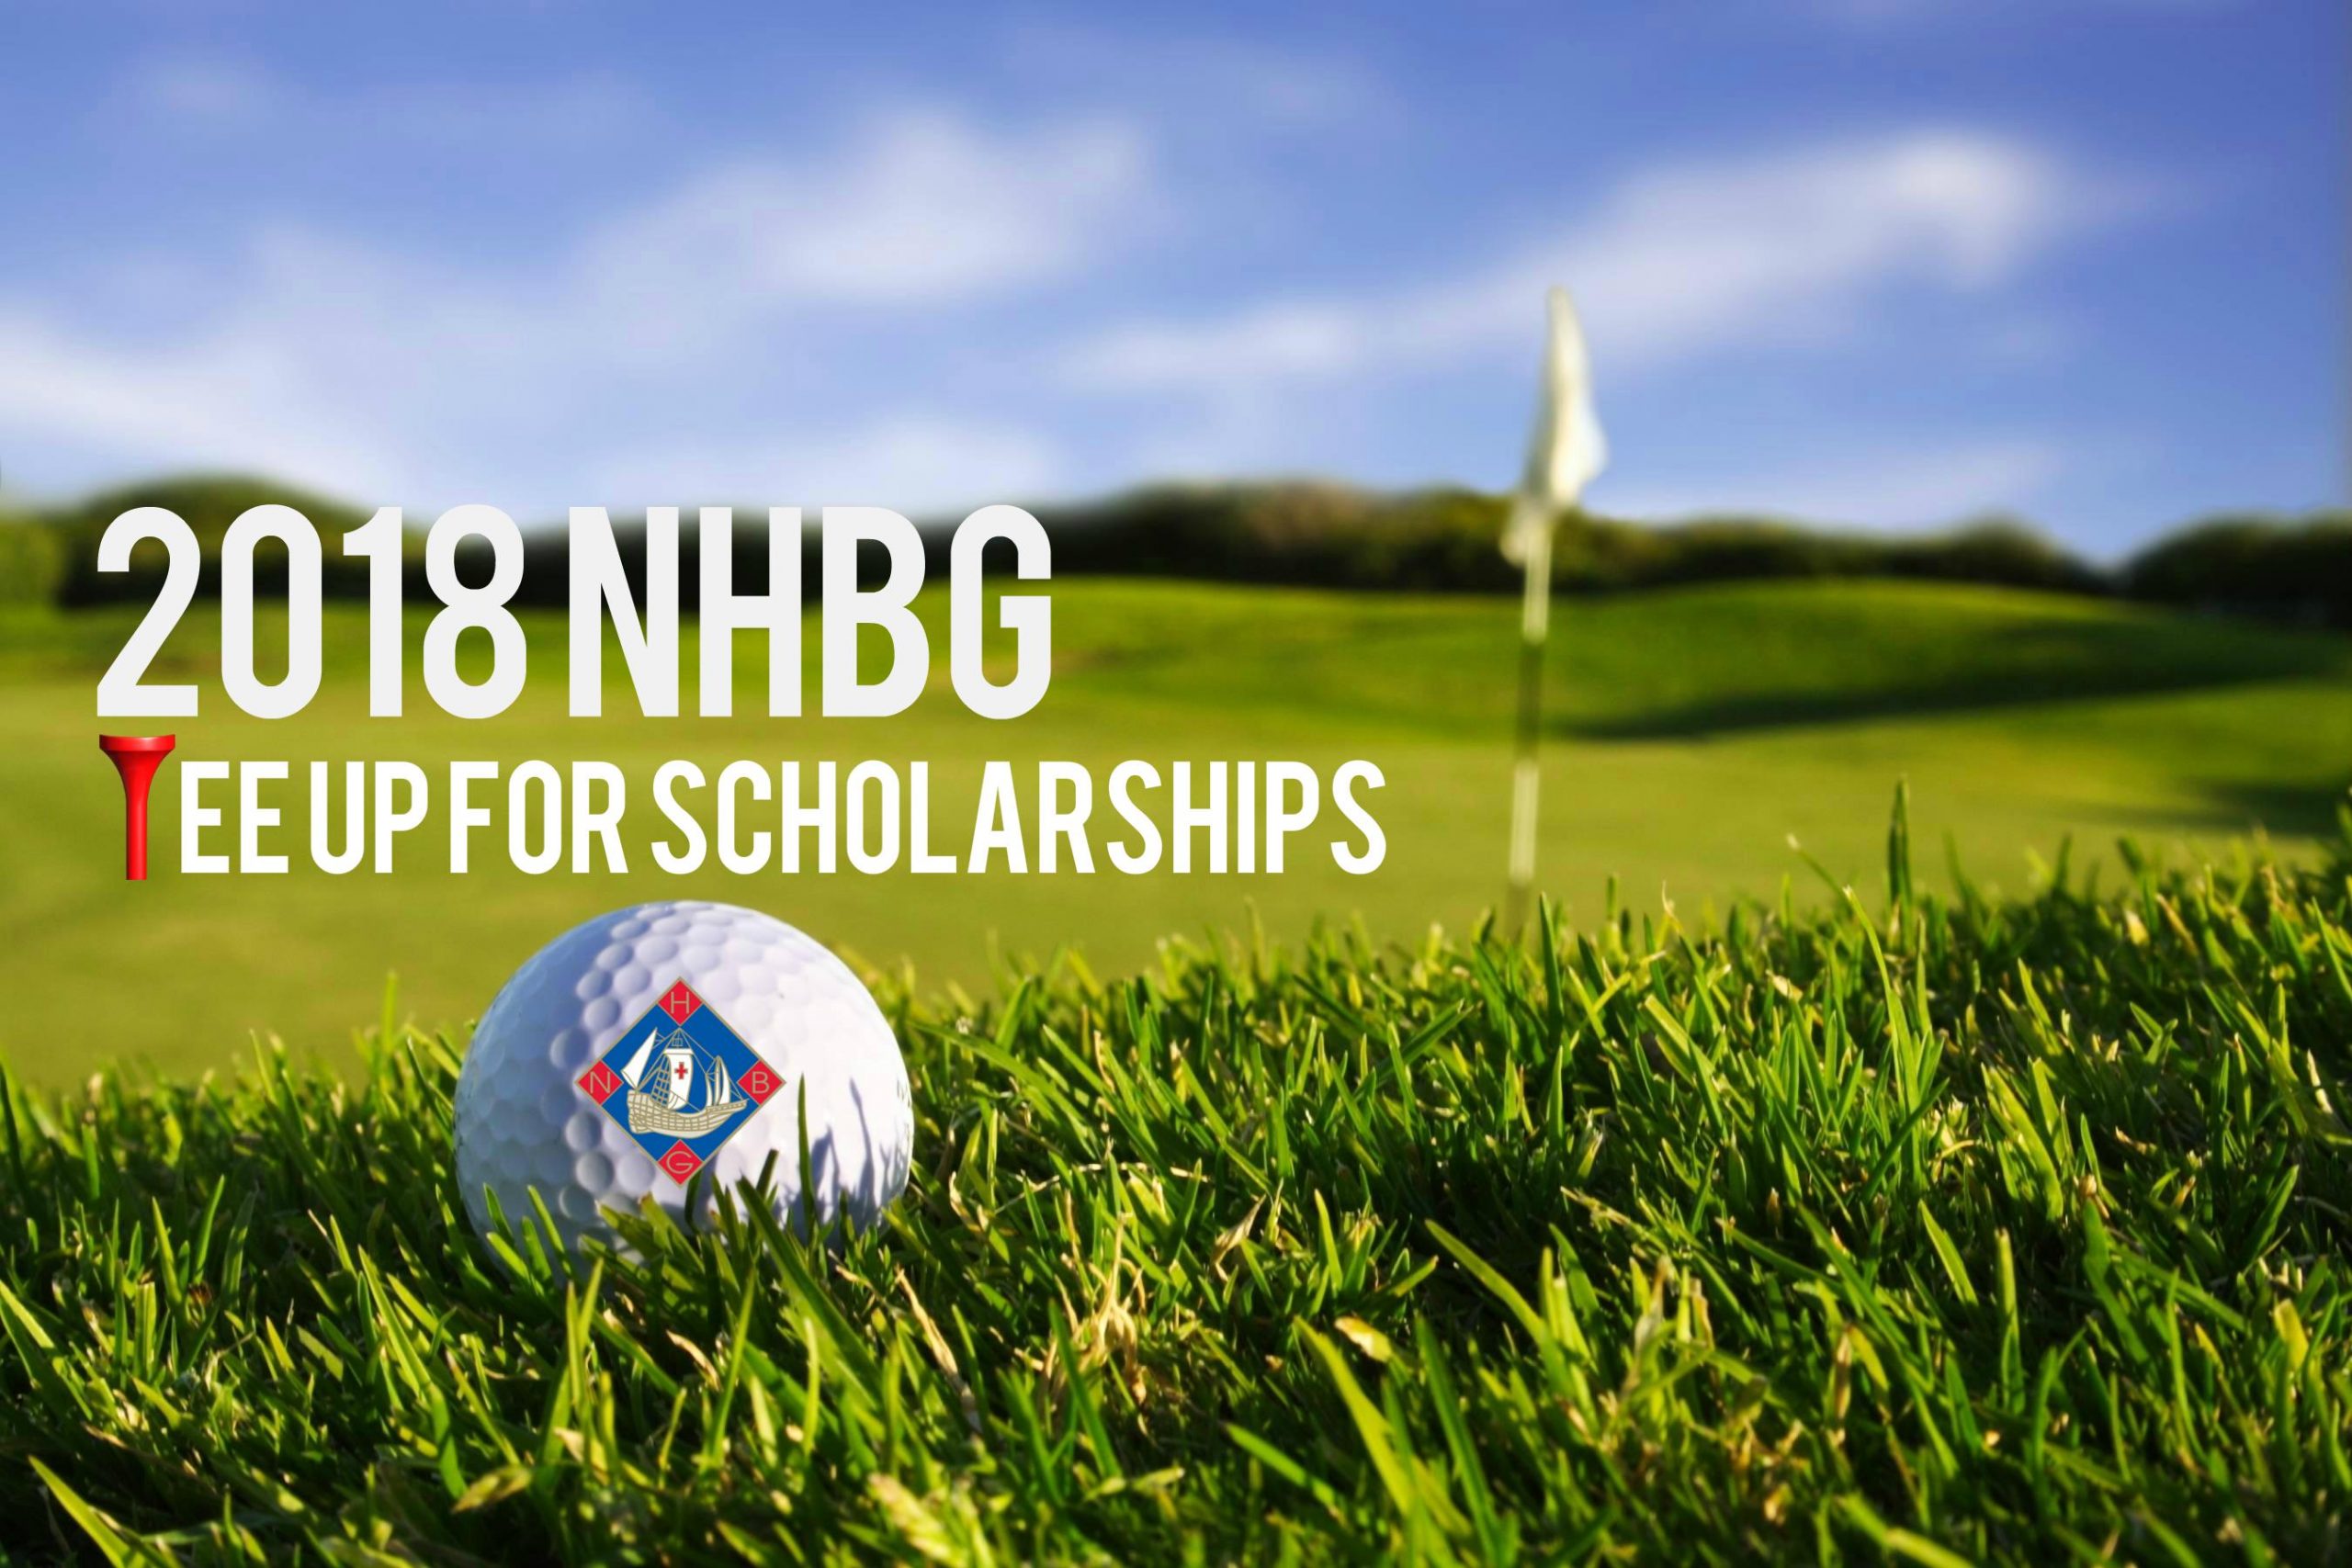 2021 NHBG Golf Outing: Tee-up for Scholarships